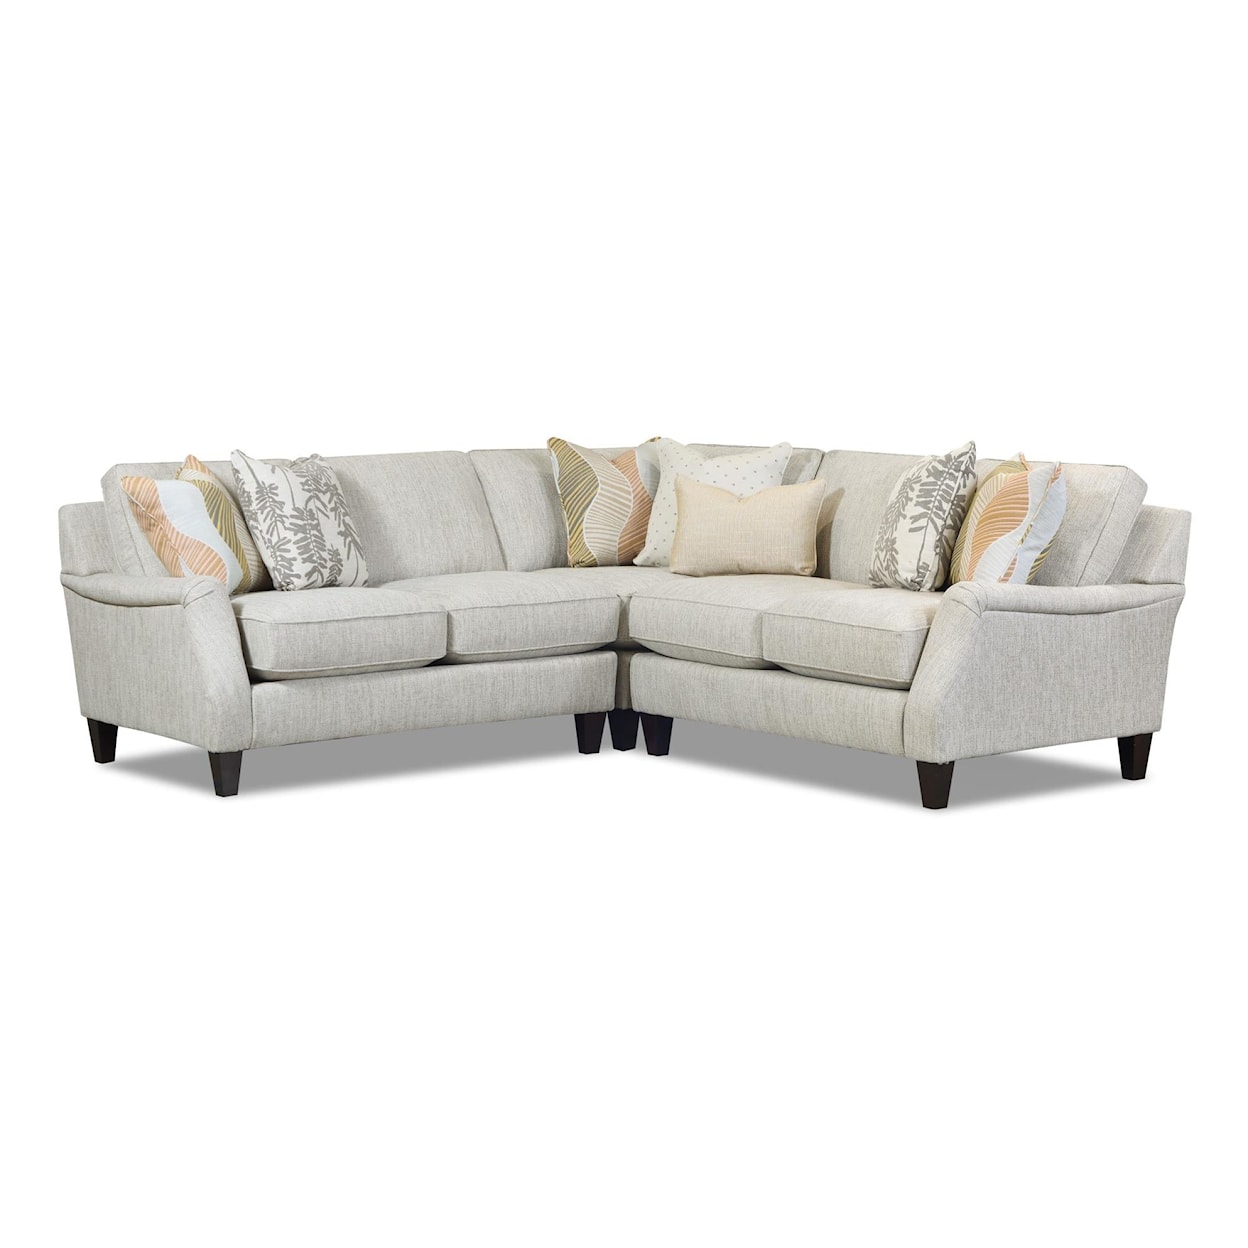 Fusion Furniture 7002 LOXLEY COCONUT Sectional